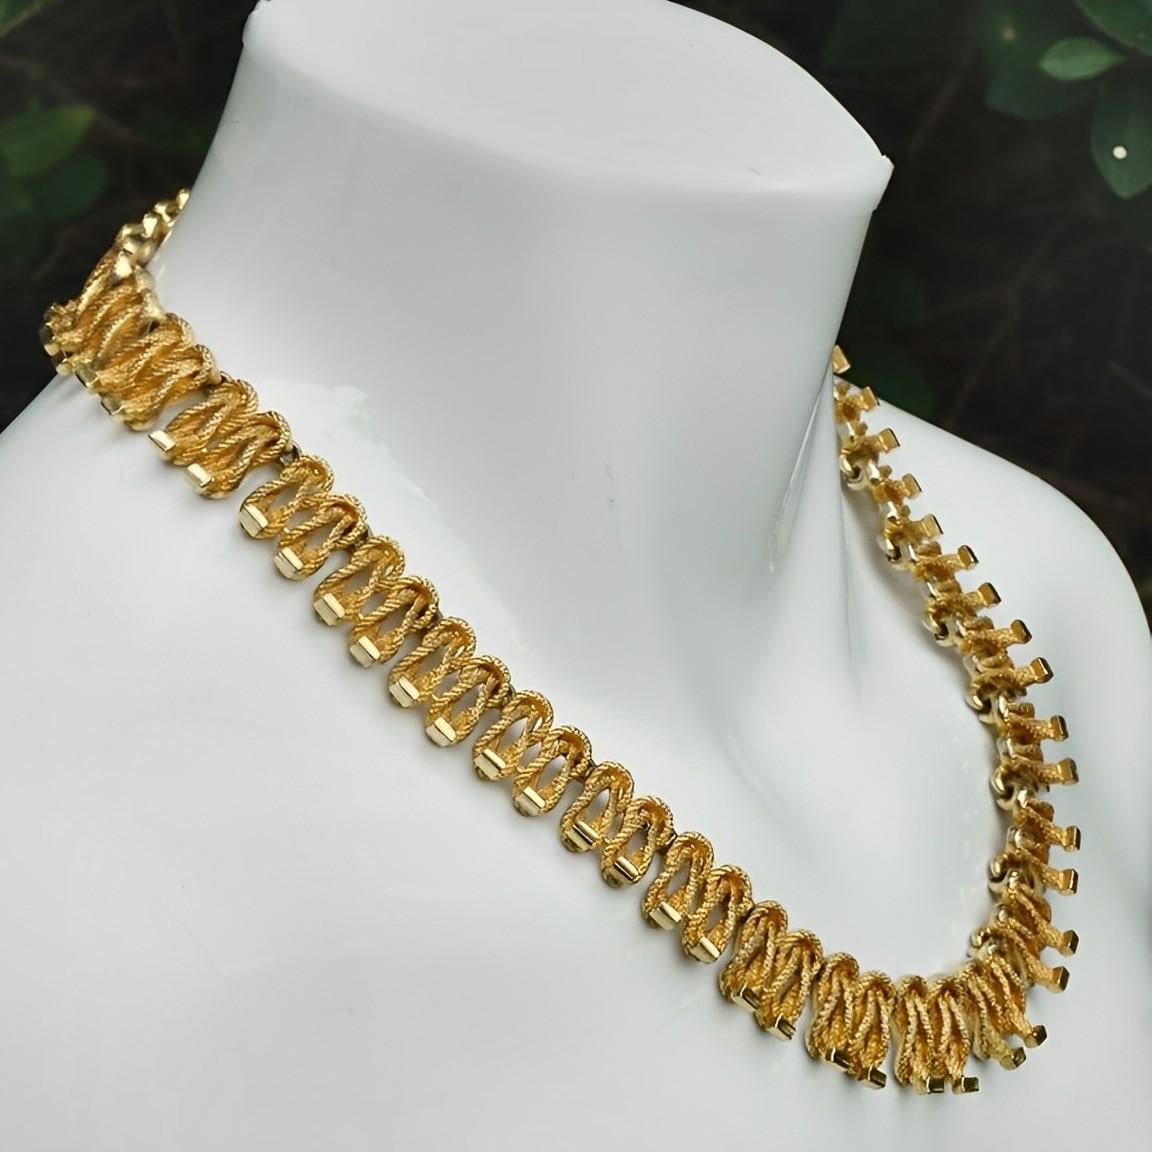 Gold Plated Textured Knot Design Link Necklace circa 1950s In Good Condition For Sale In London, GB